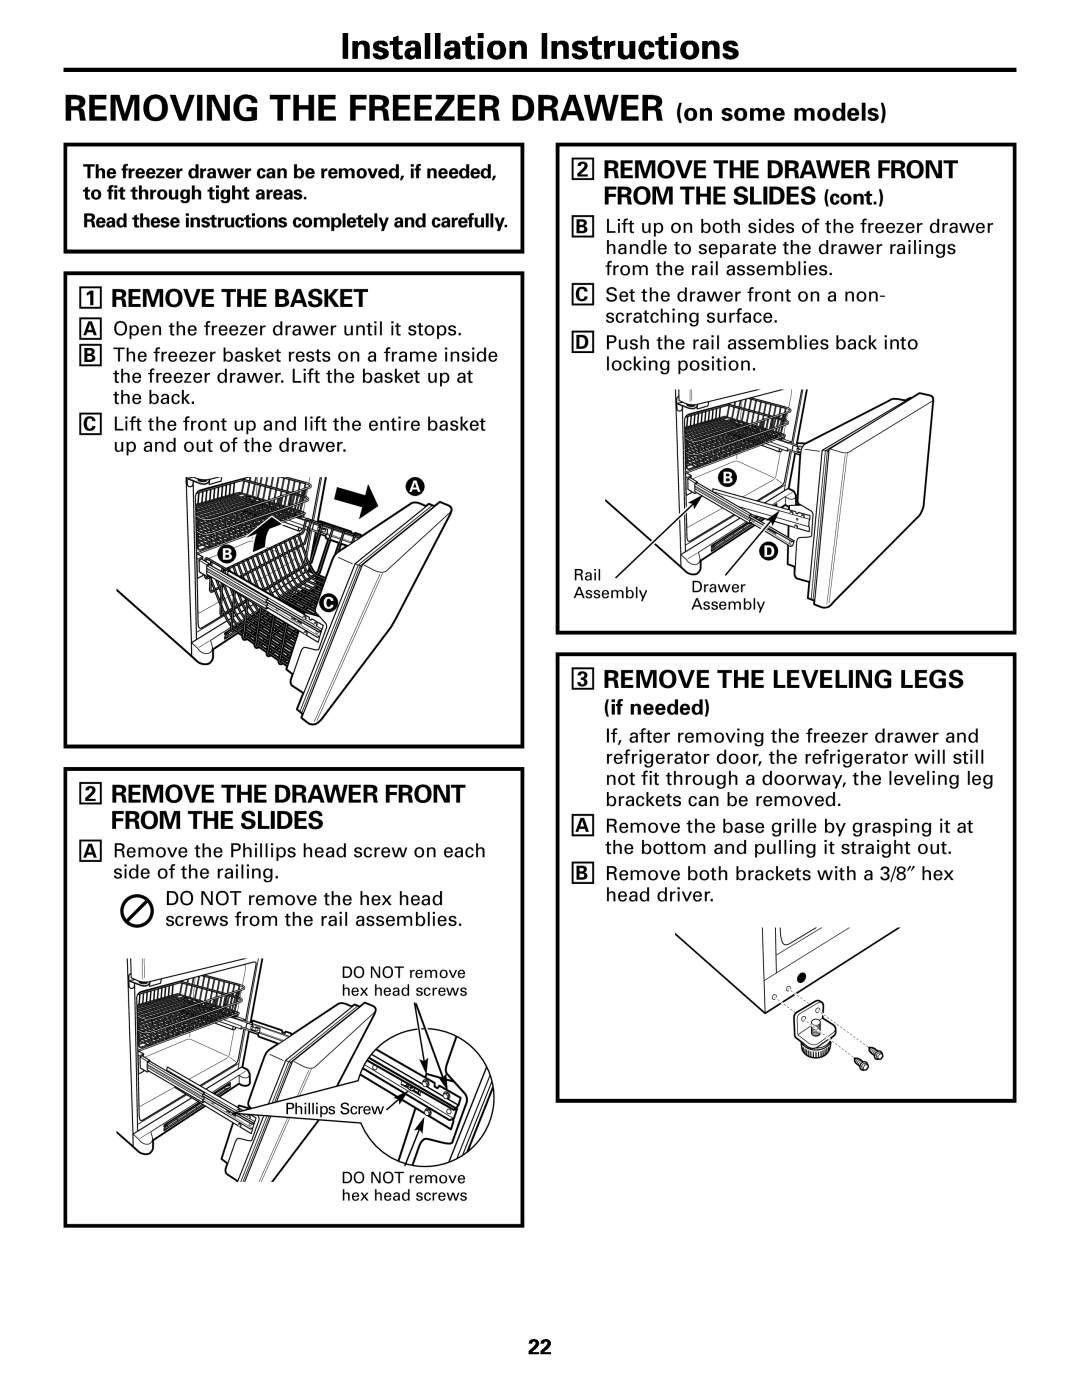 GE Monogram 22, 20 Installation Instructions REMOVING THE FREEZER DRAWER on some models, Remove The Basket, if needed 